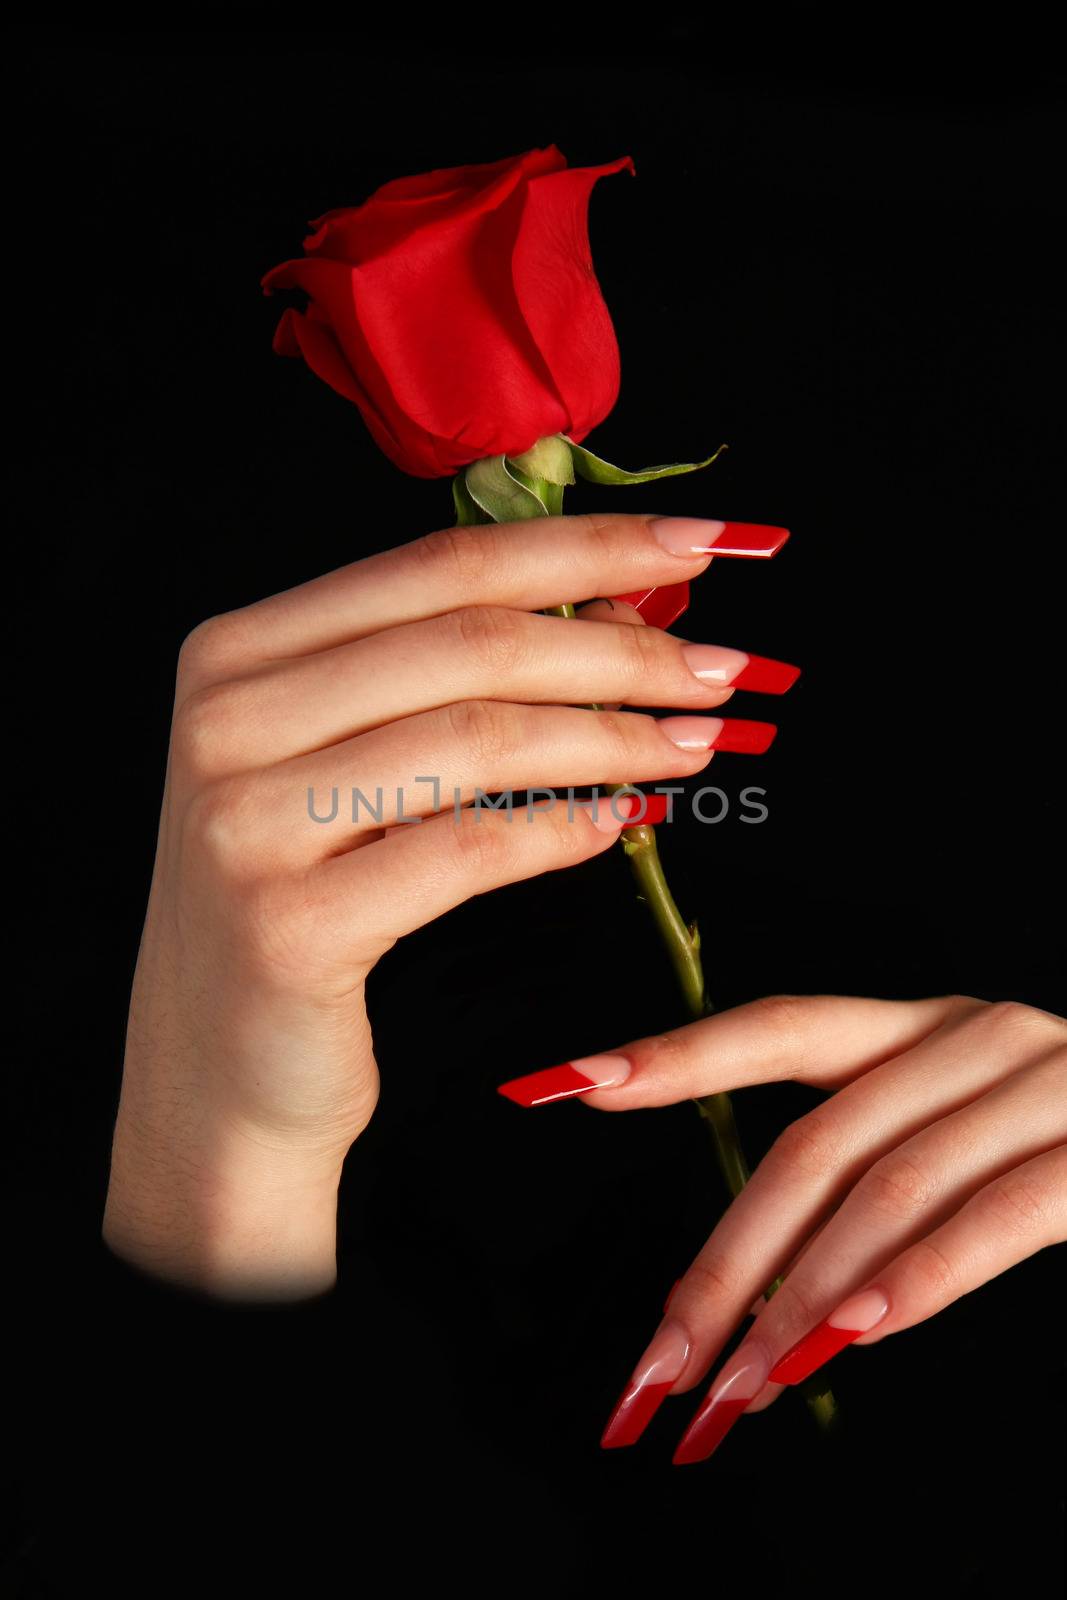 Beautiful hands with french manicure on black background